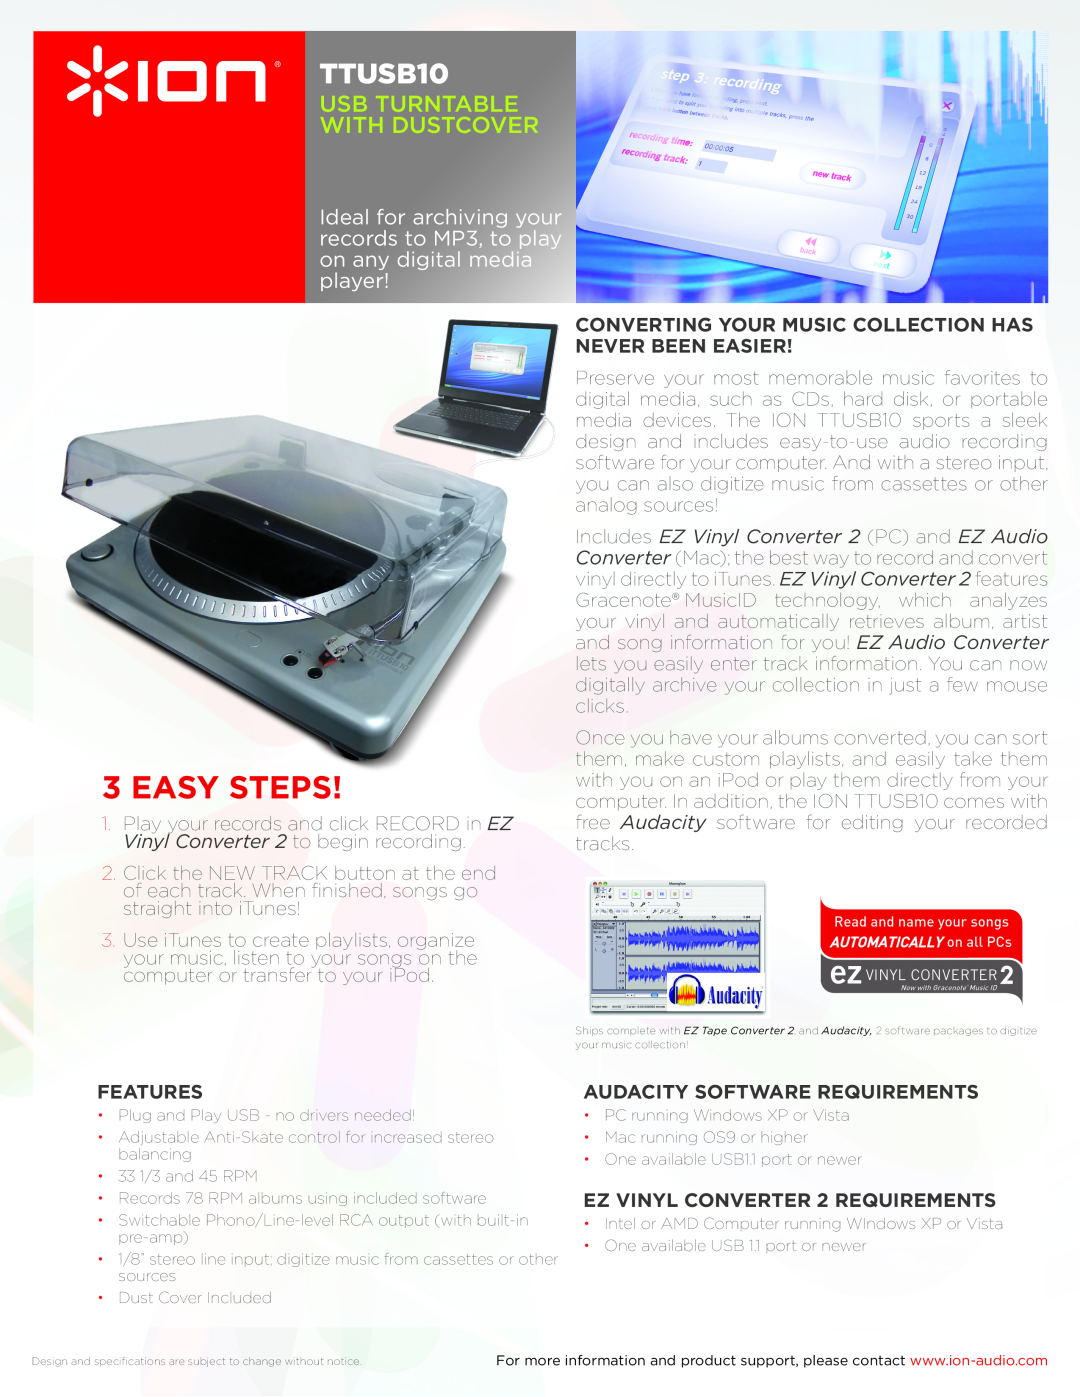 ION TTUSB10 specifications easy steps, usb turntable with dustcover, features, Audacity Software Requirements 